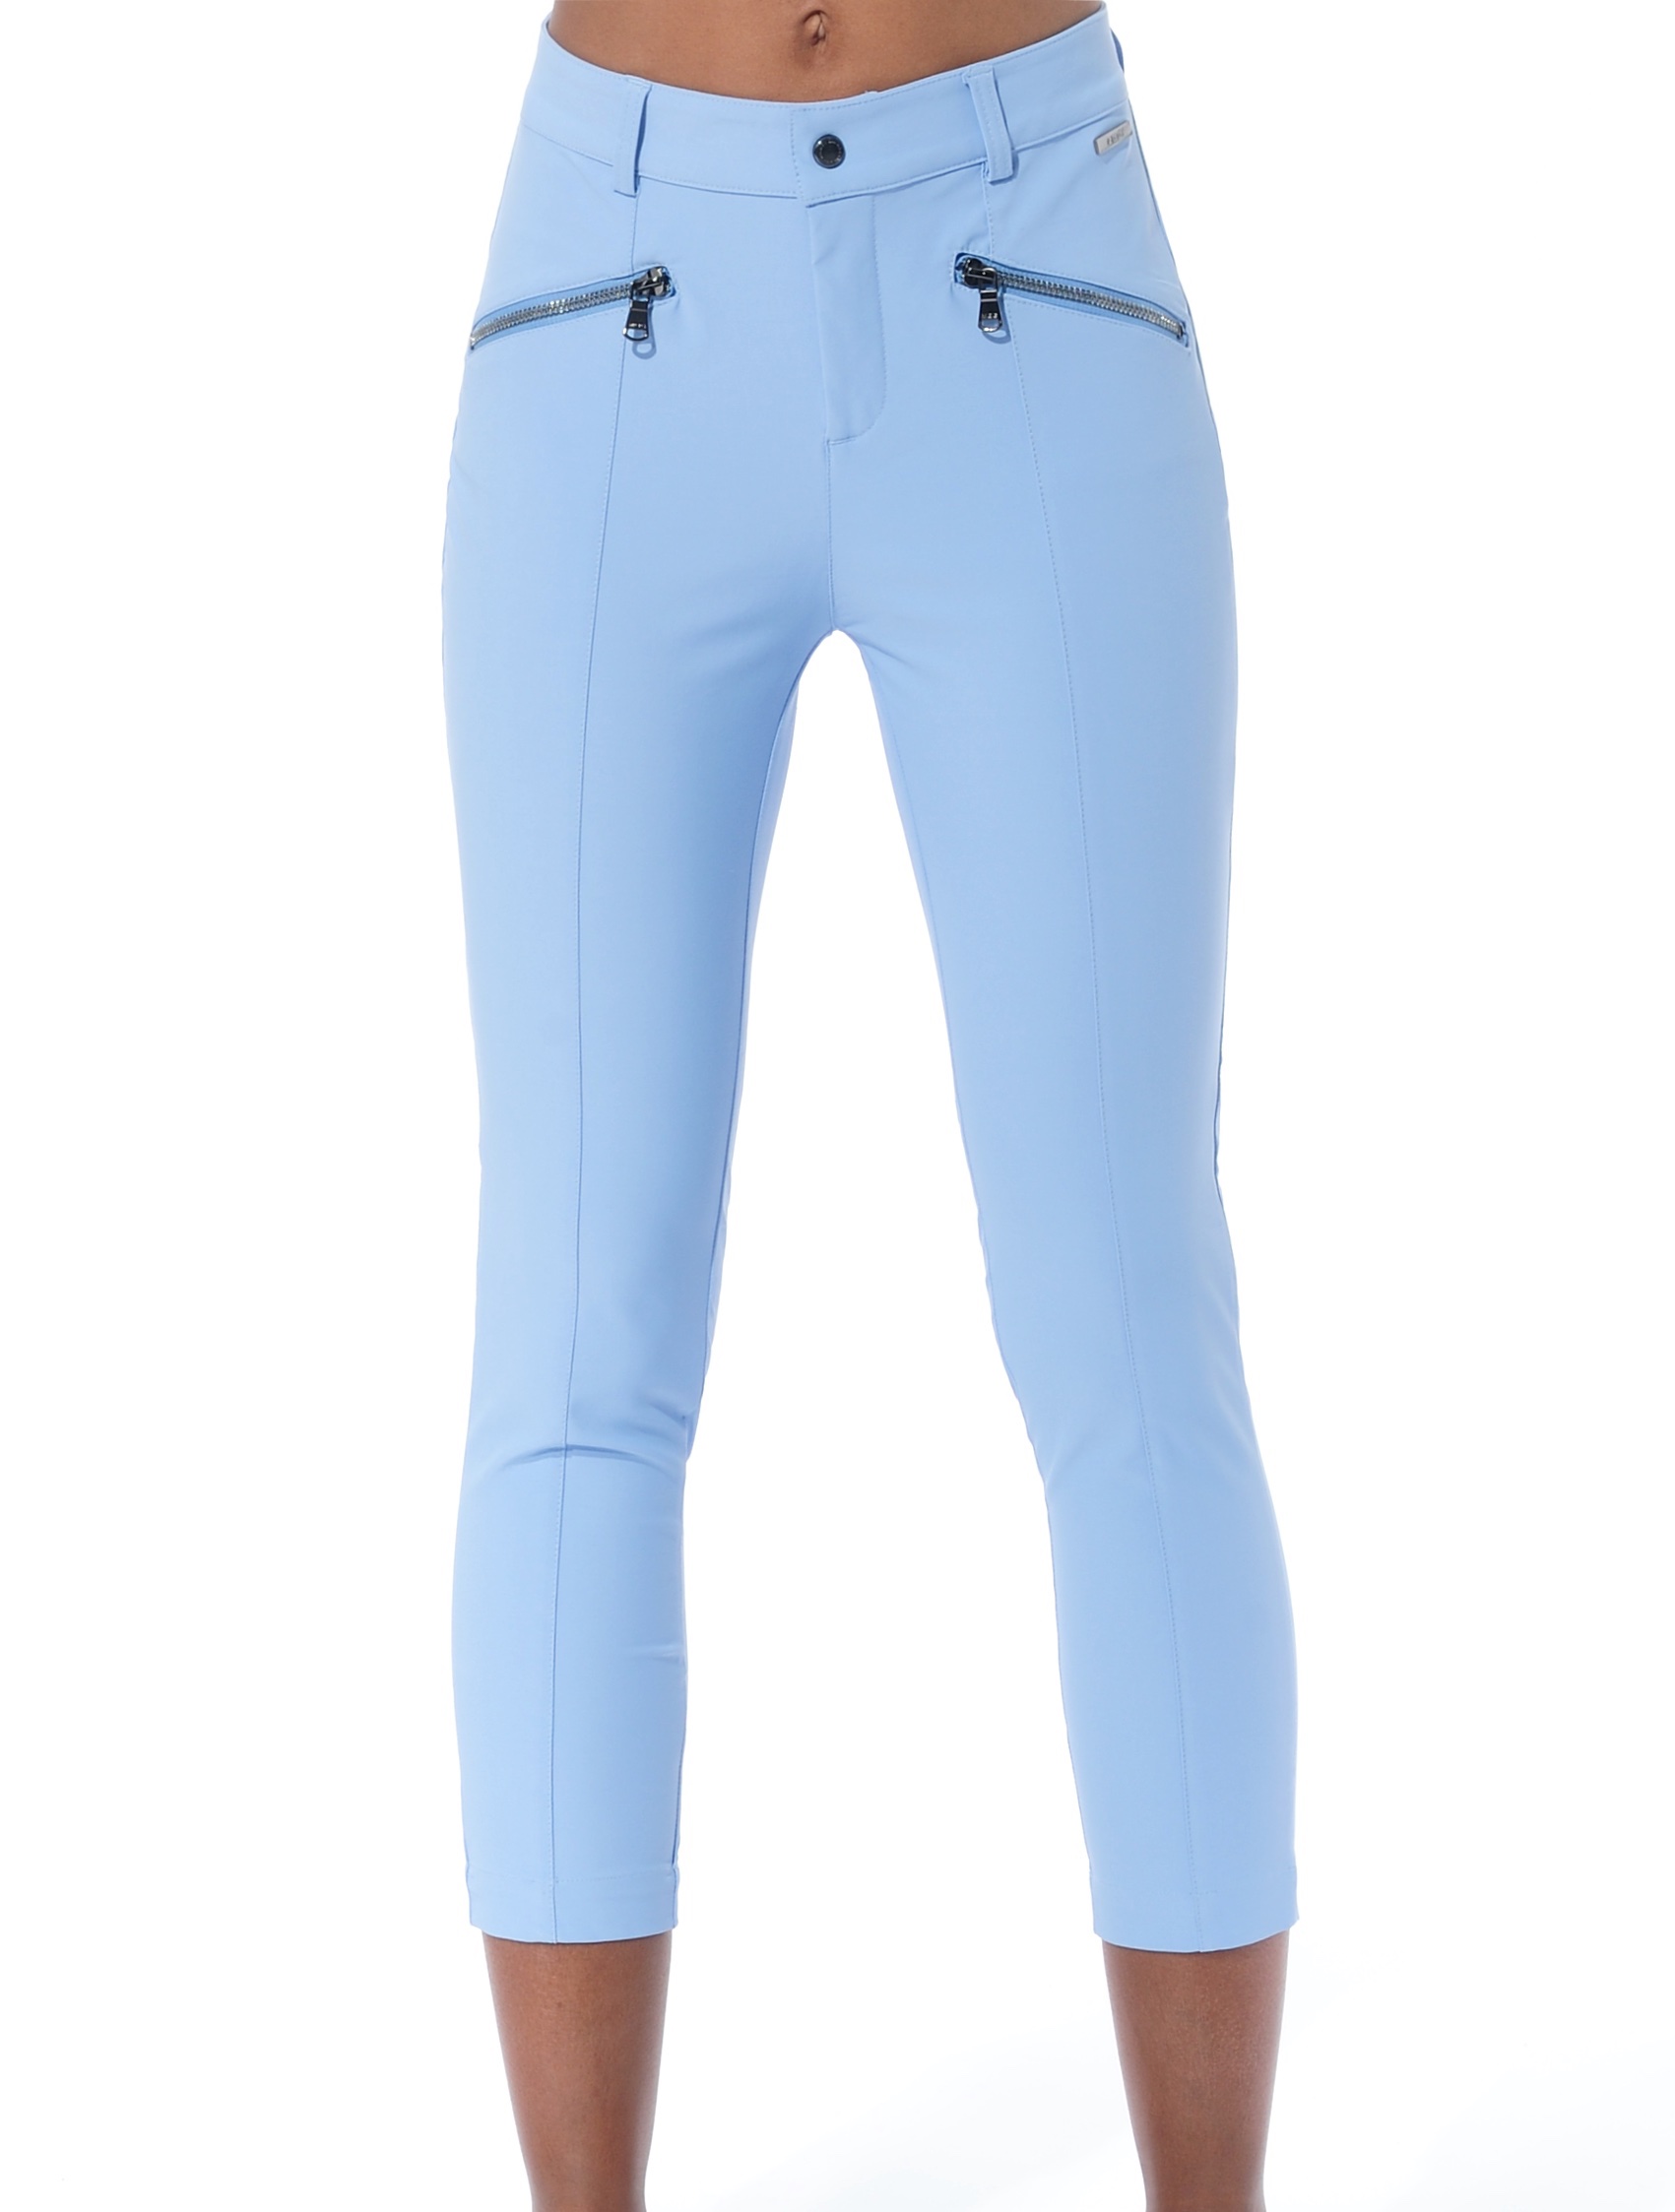 4way stretch curvy cropped pants baby blue 